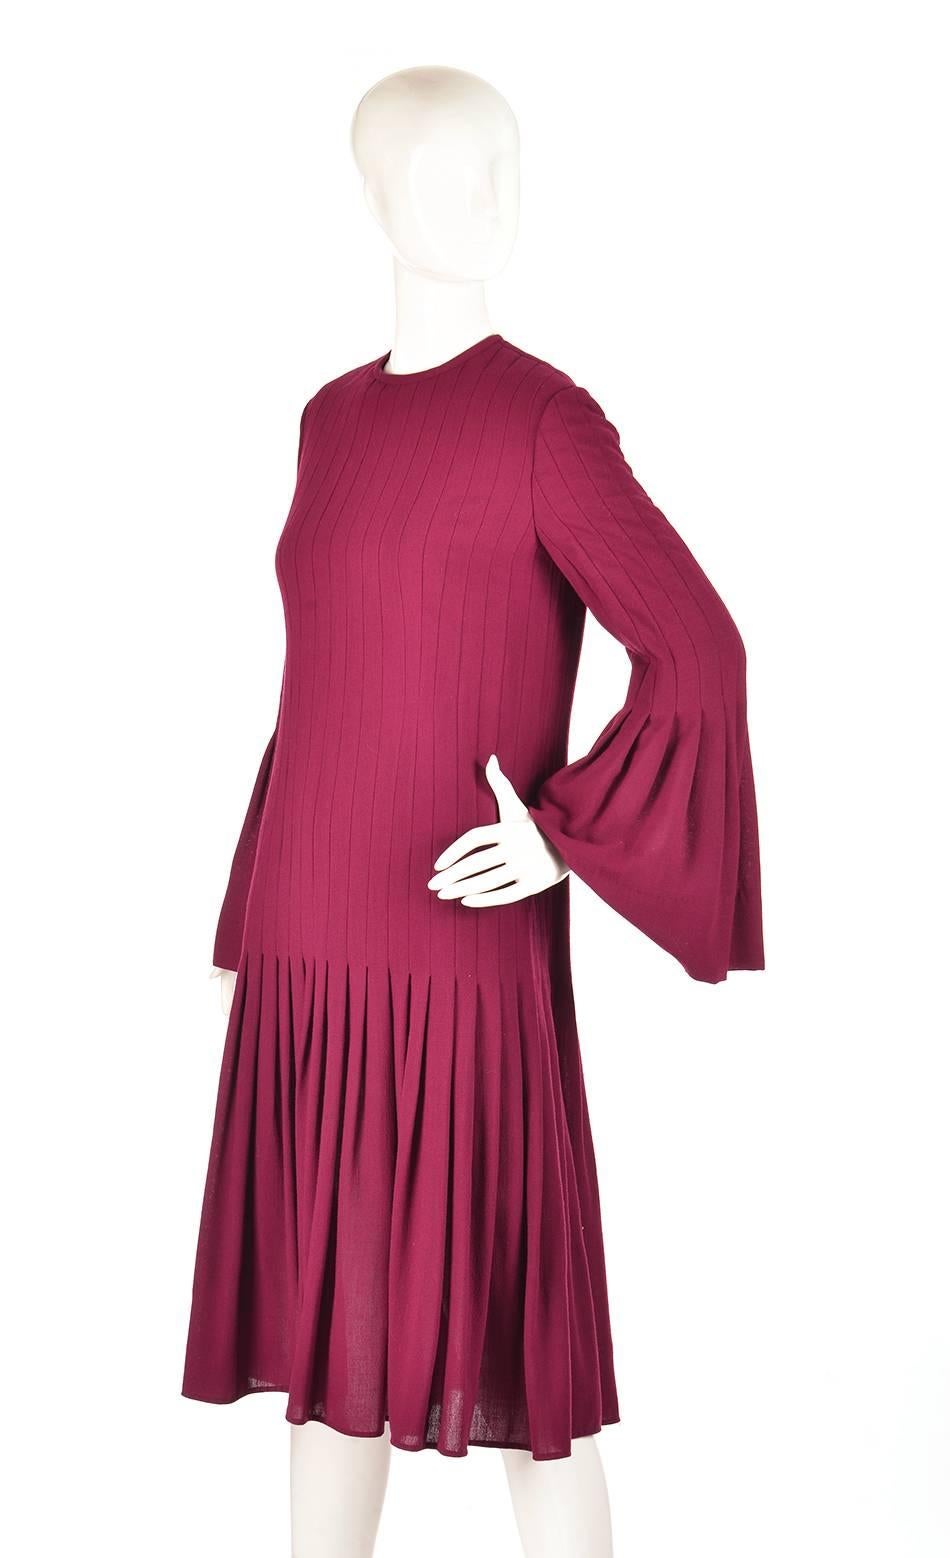 
Romantic 1960s Pierre Cardin dress. This knee-length dress appears to be composed entirely of open and closed pleats. The pleated look of the dress creates a vertical stripe effect that opens up at the trumpet sleeves and trumpet skirt. The dress